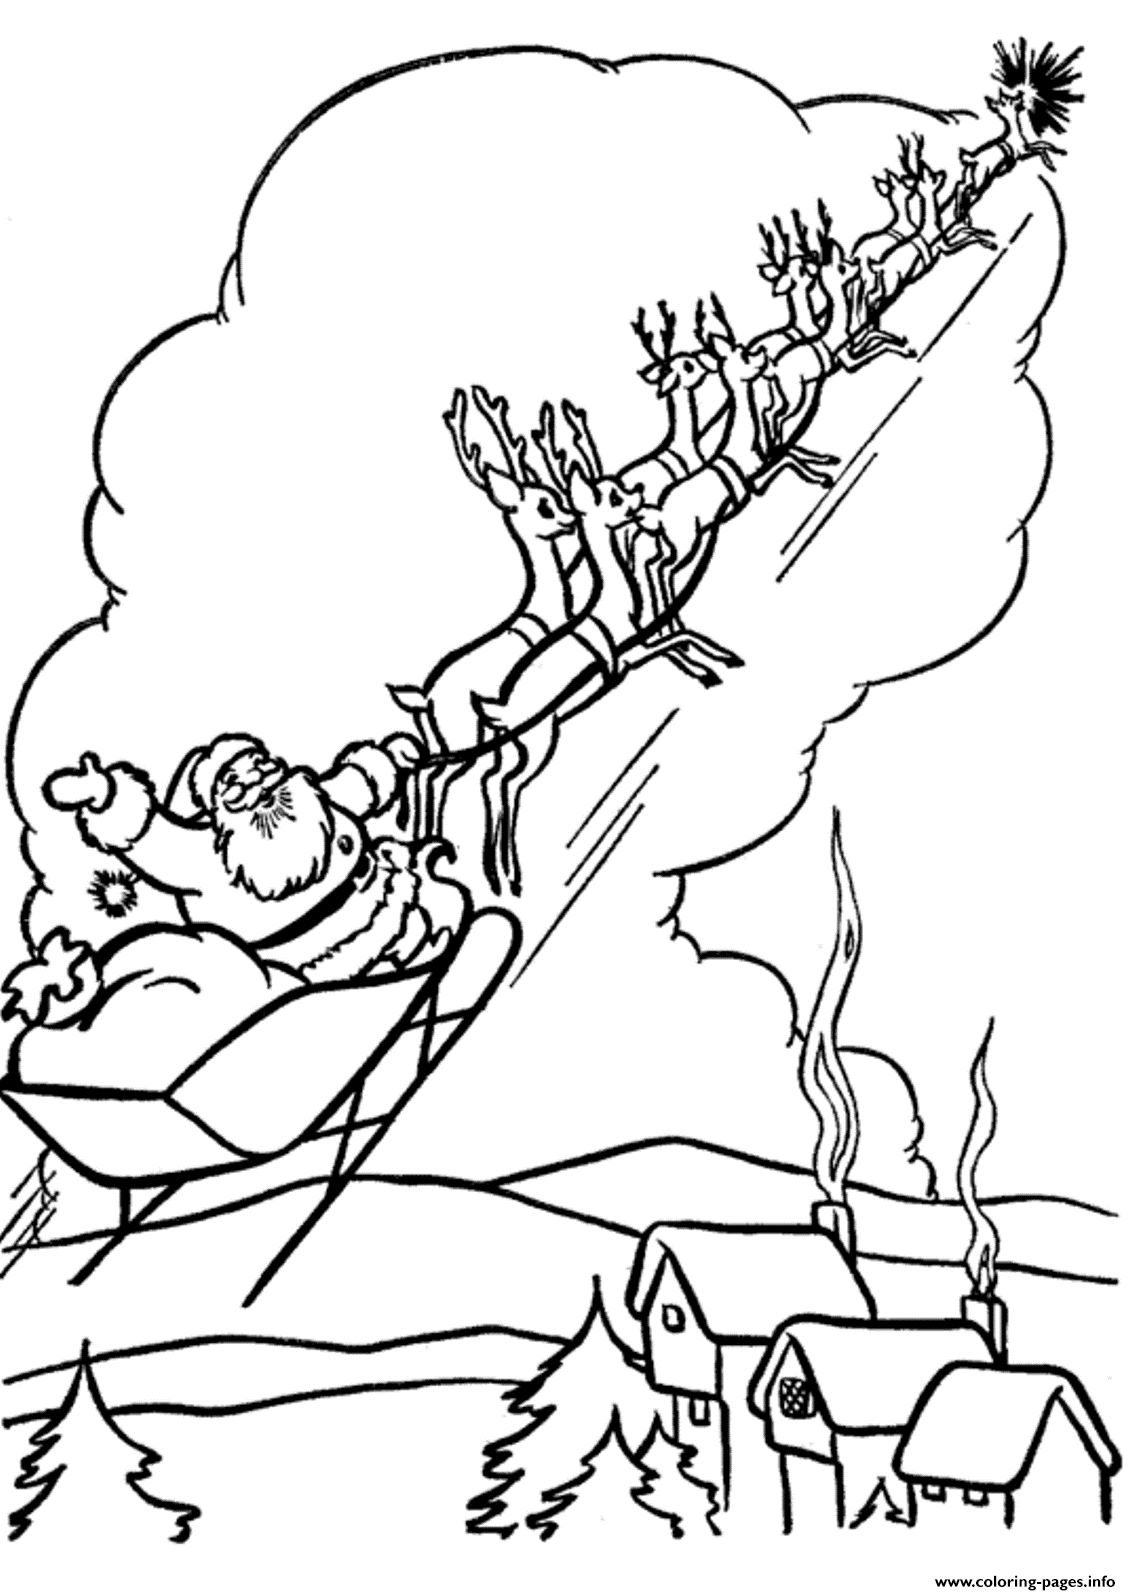 Coloring Pages Of Santa Claus Flying17ba coloring